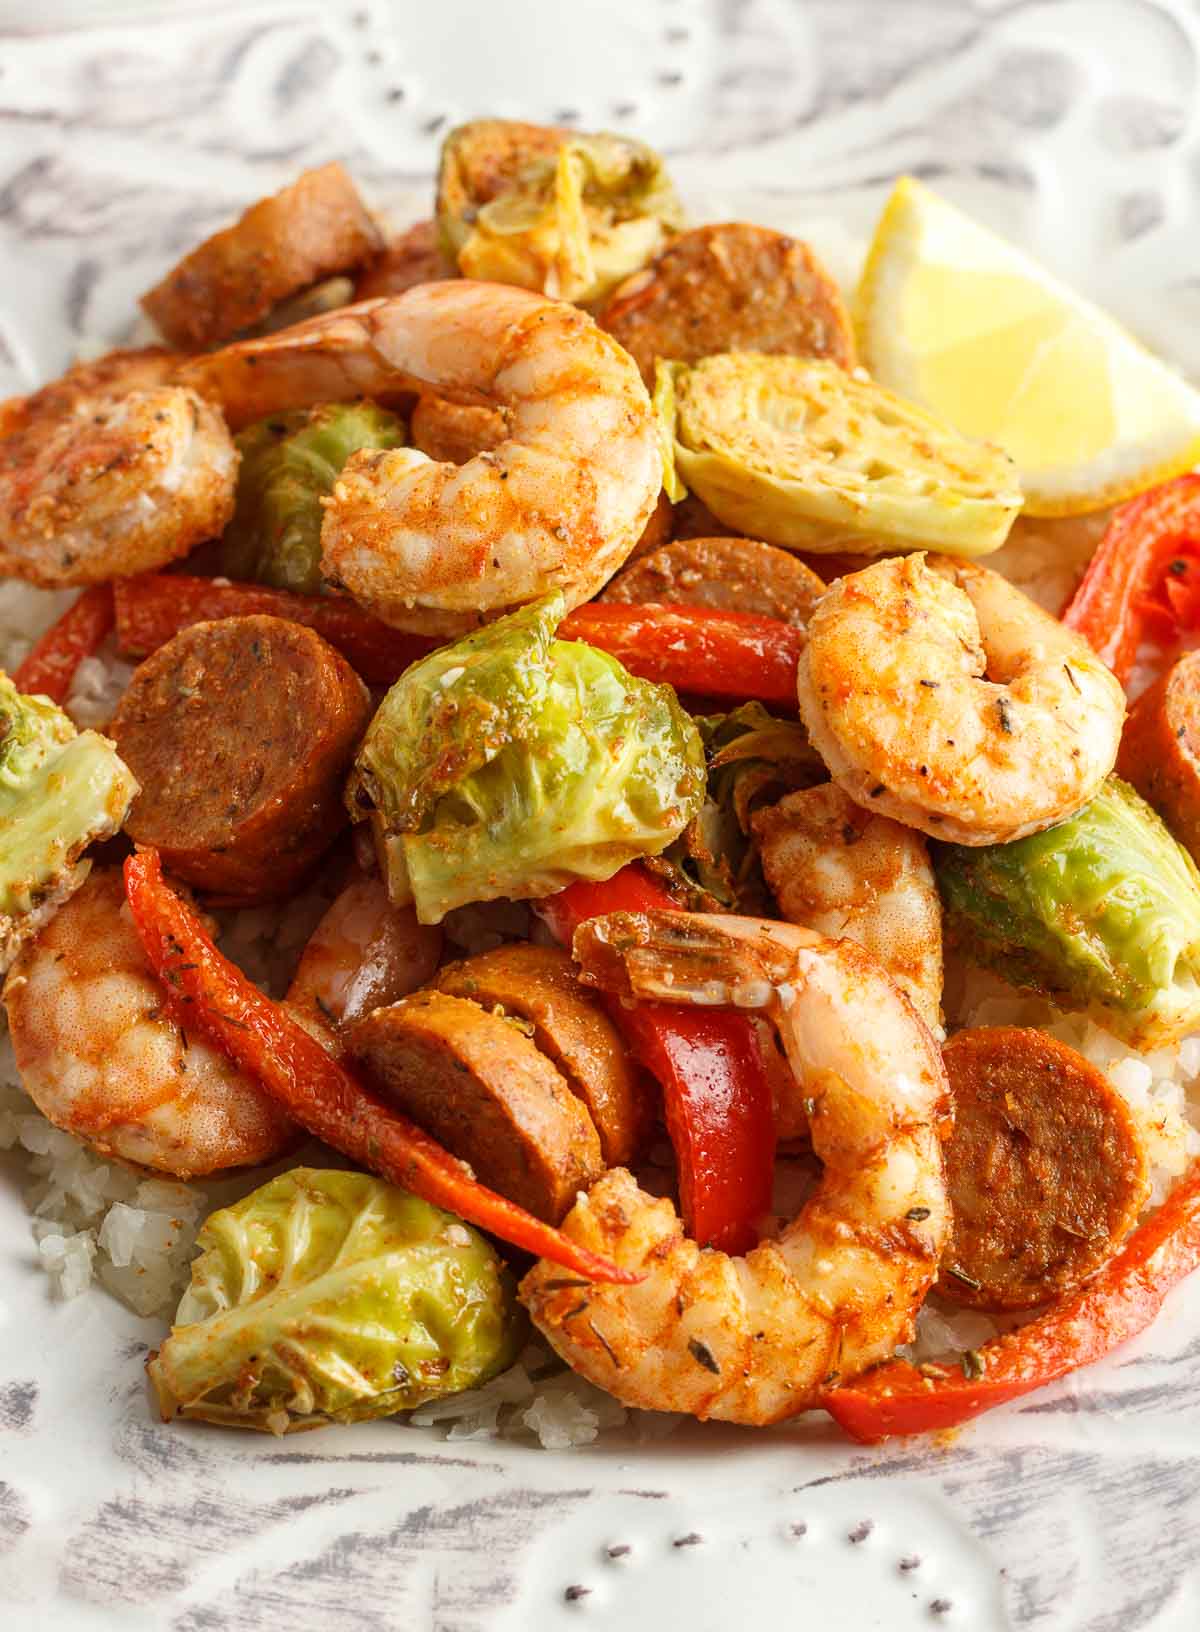 A plate of Cajun shrimp and sausage with veggies and cauliflower rice.